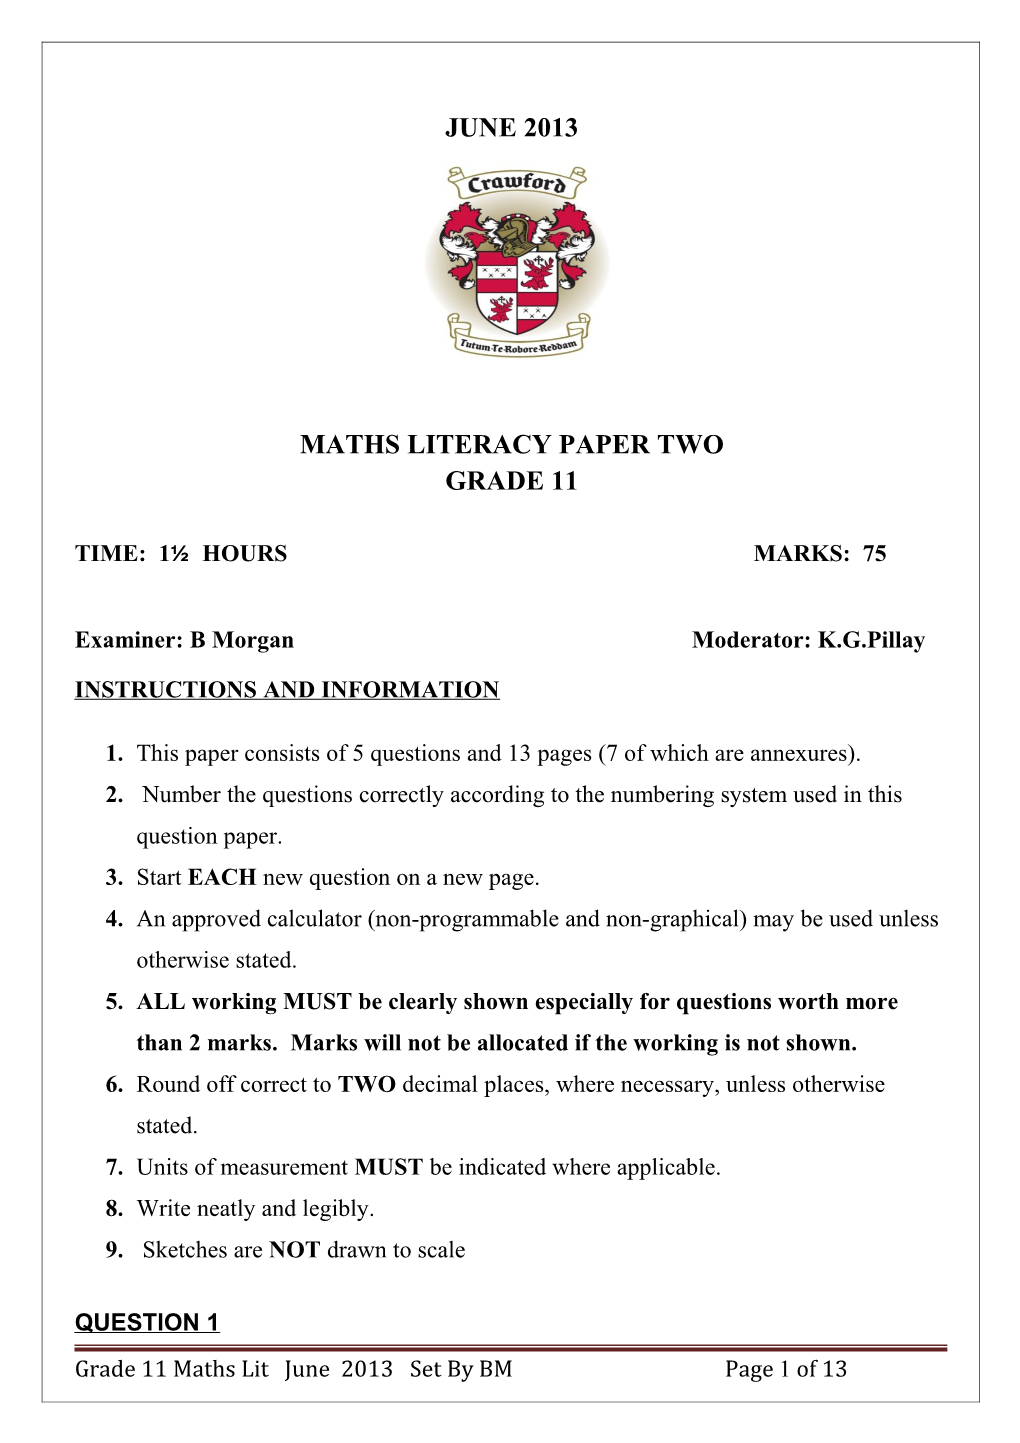 JUNE 2013 MATHS LITERACY PAPER TWO GRADE 11 TIME: 1 HOURS MARKS: 75 Examiner: B Morgan